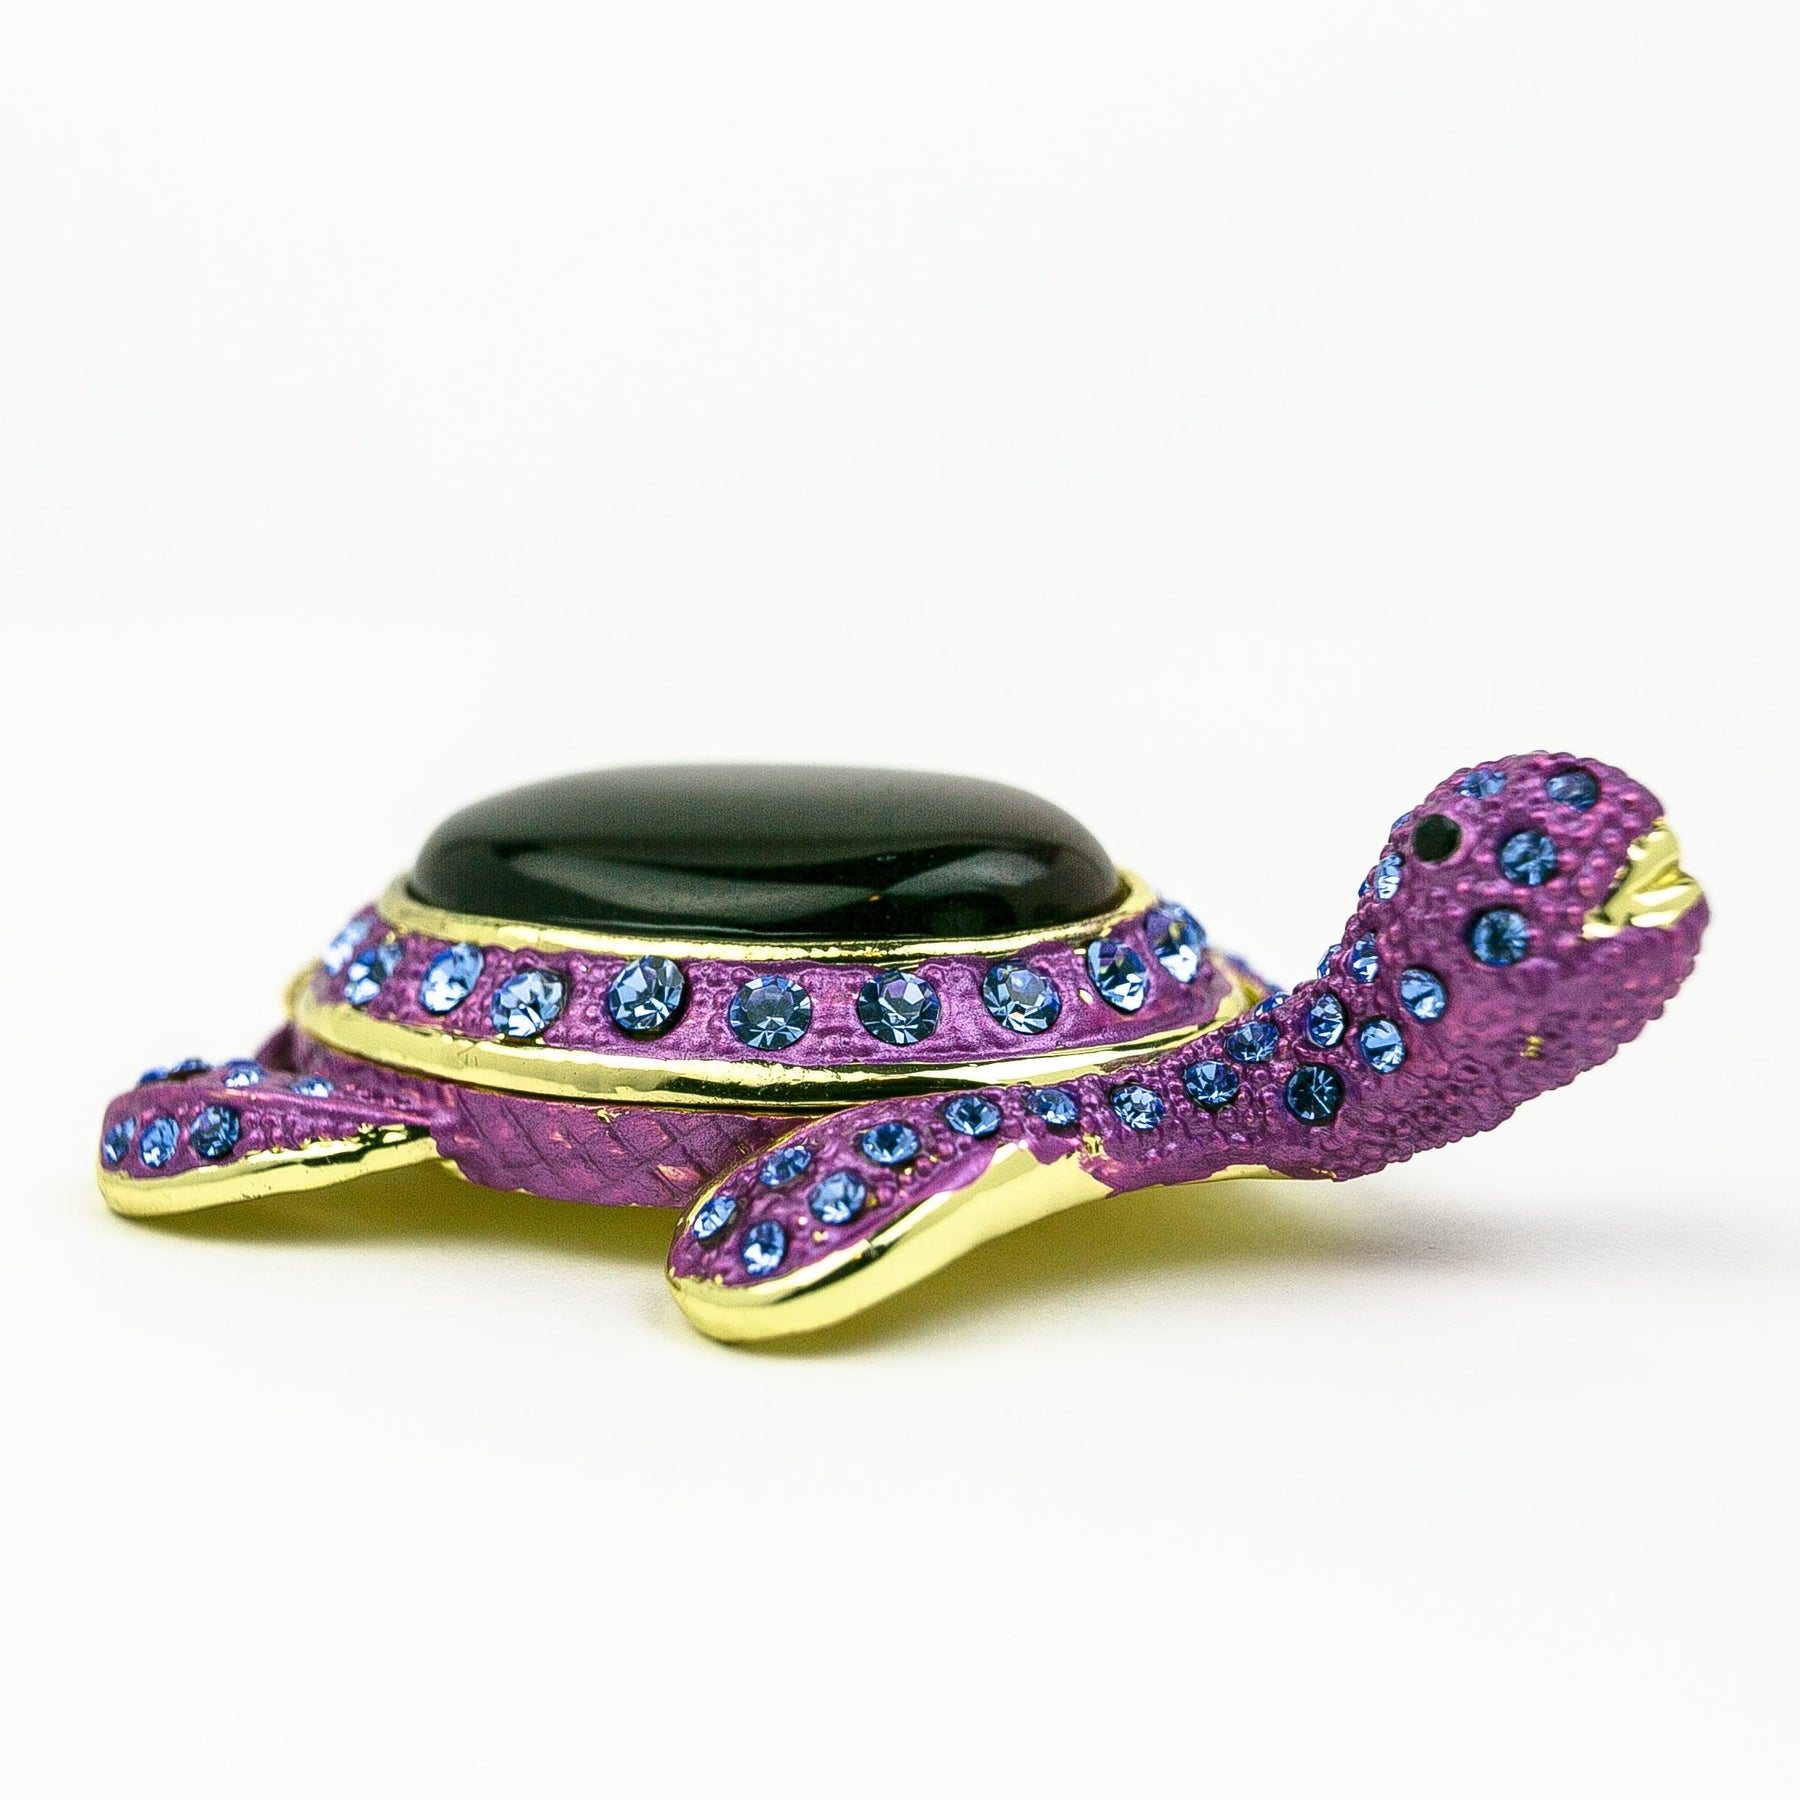 Violet Turtle Decorated with Blue Crystals